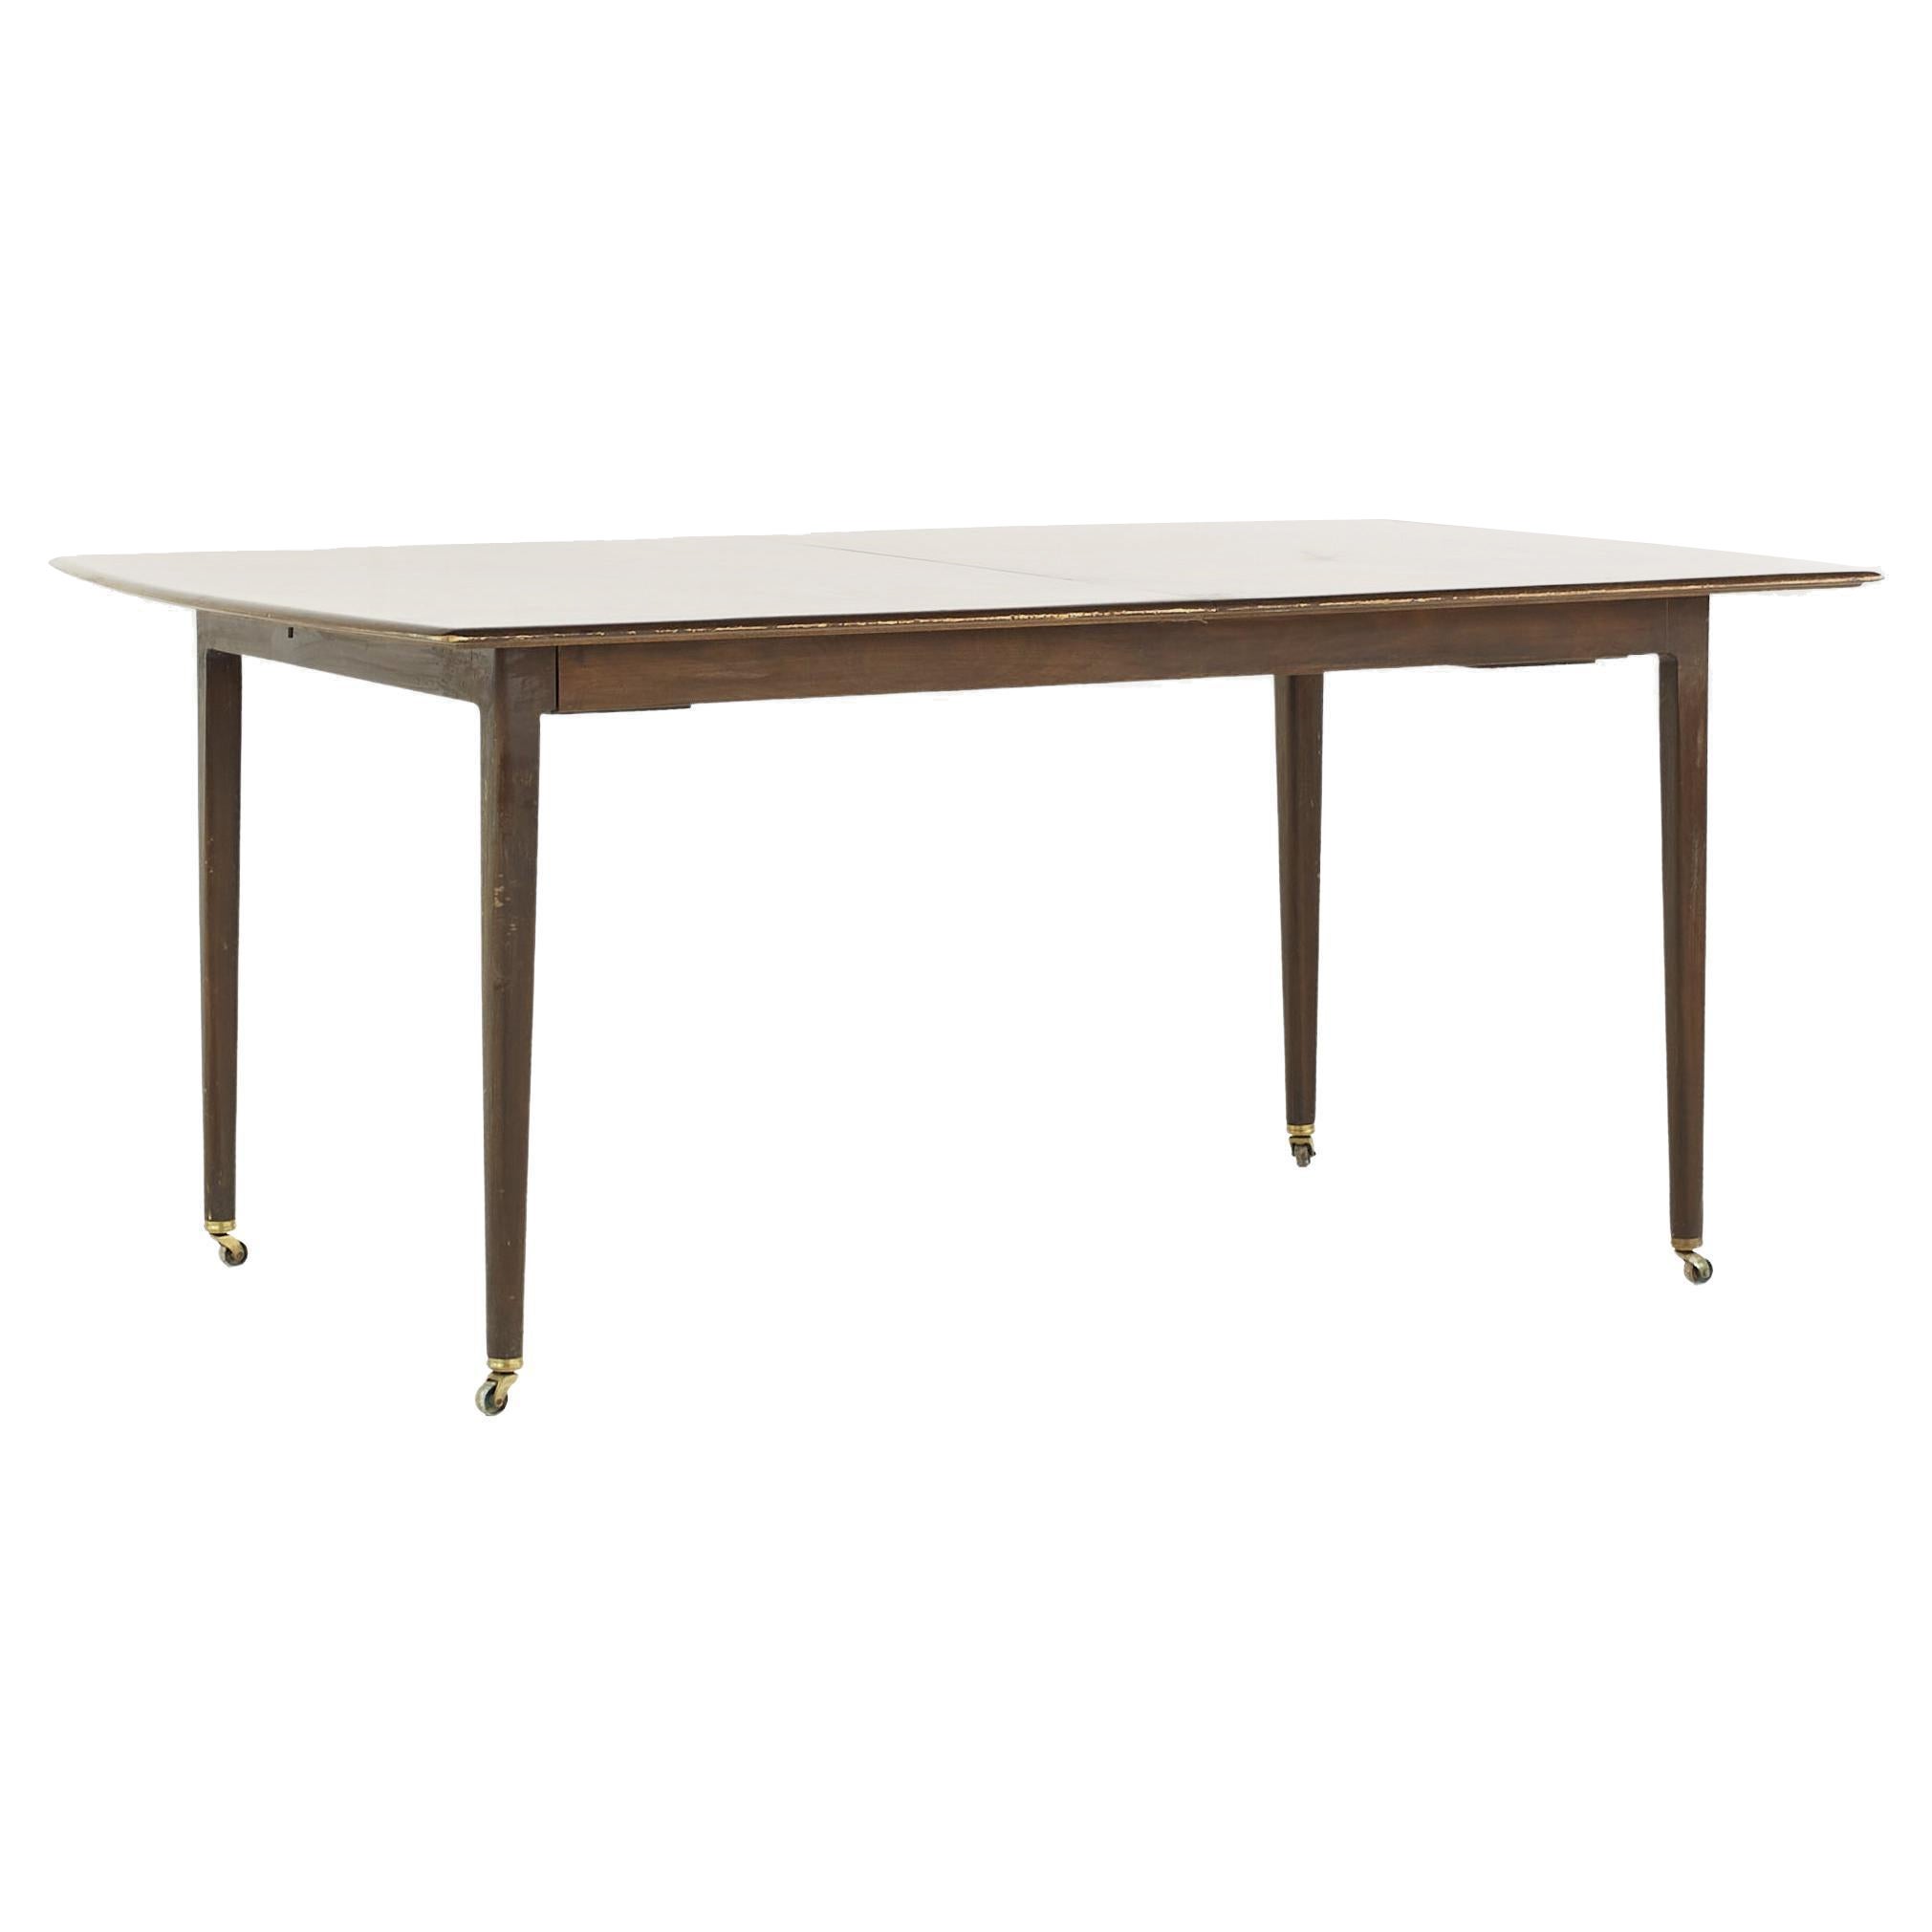 Dunbar Mid Century Expanding Hidden Leaf Walnut Dining Table with 2 Leaves For Sale